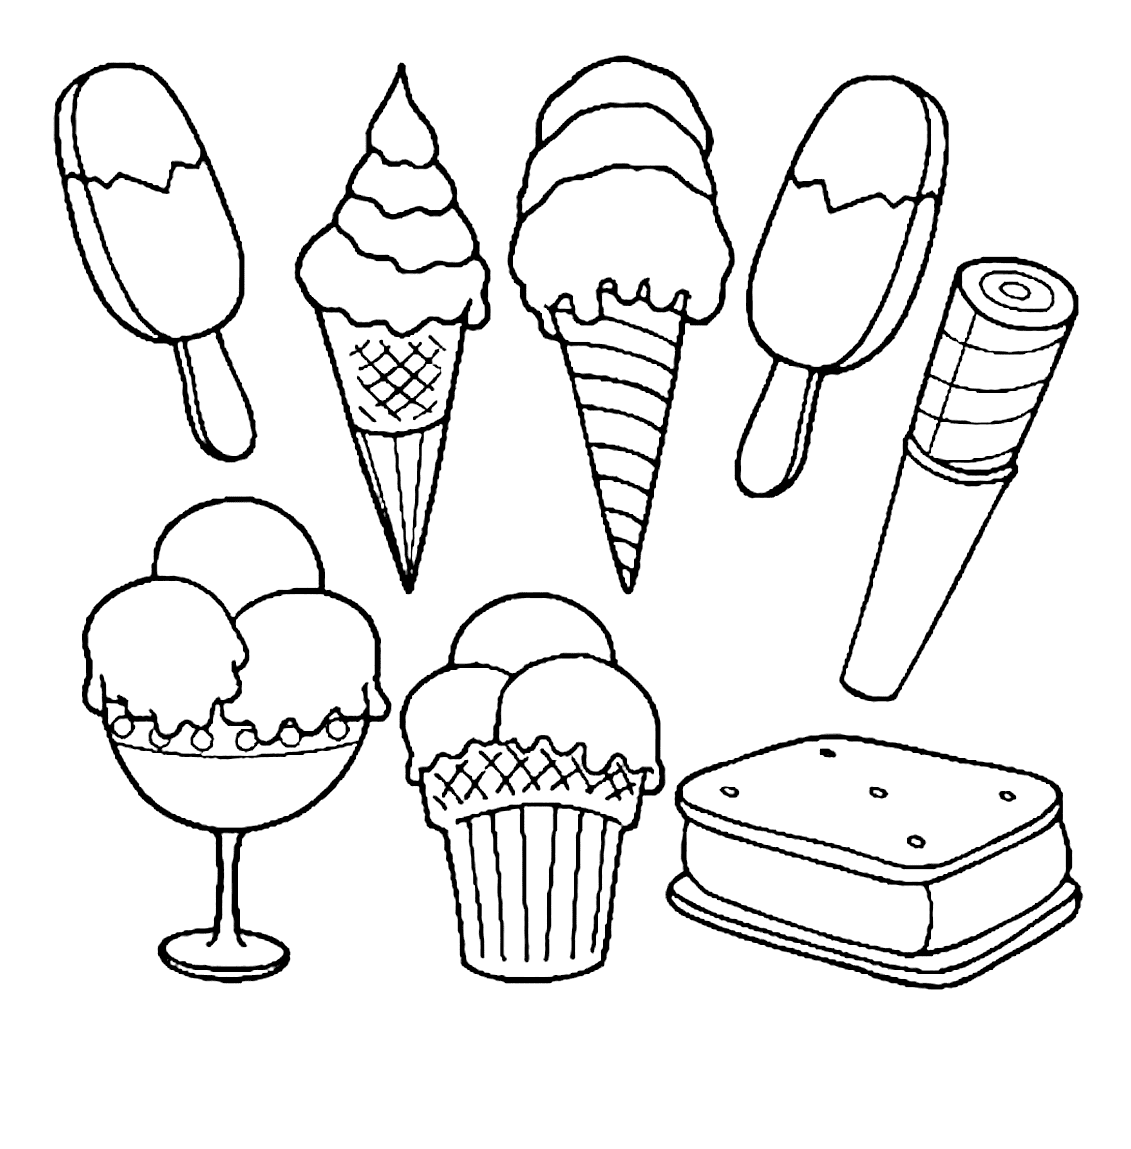 Free Ice Cream Printable Coloring Pages   Ice Cream Coloring Pages ...